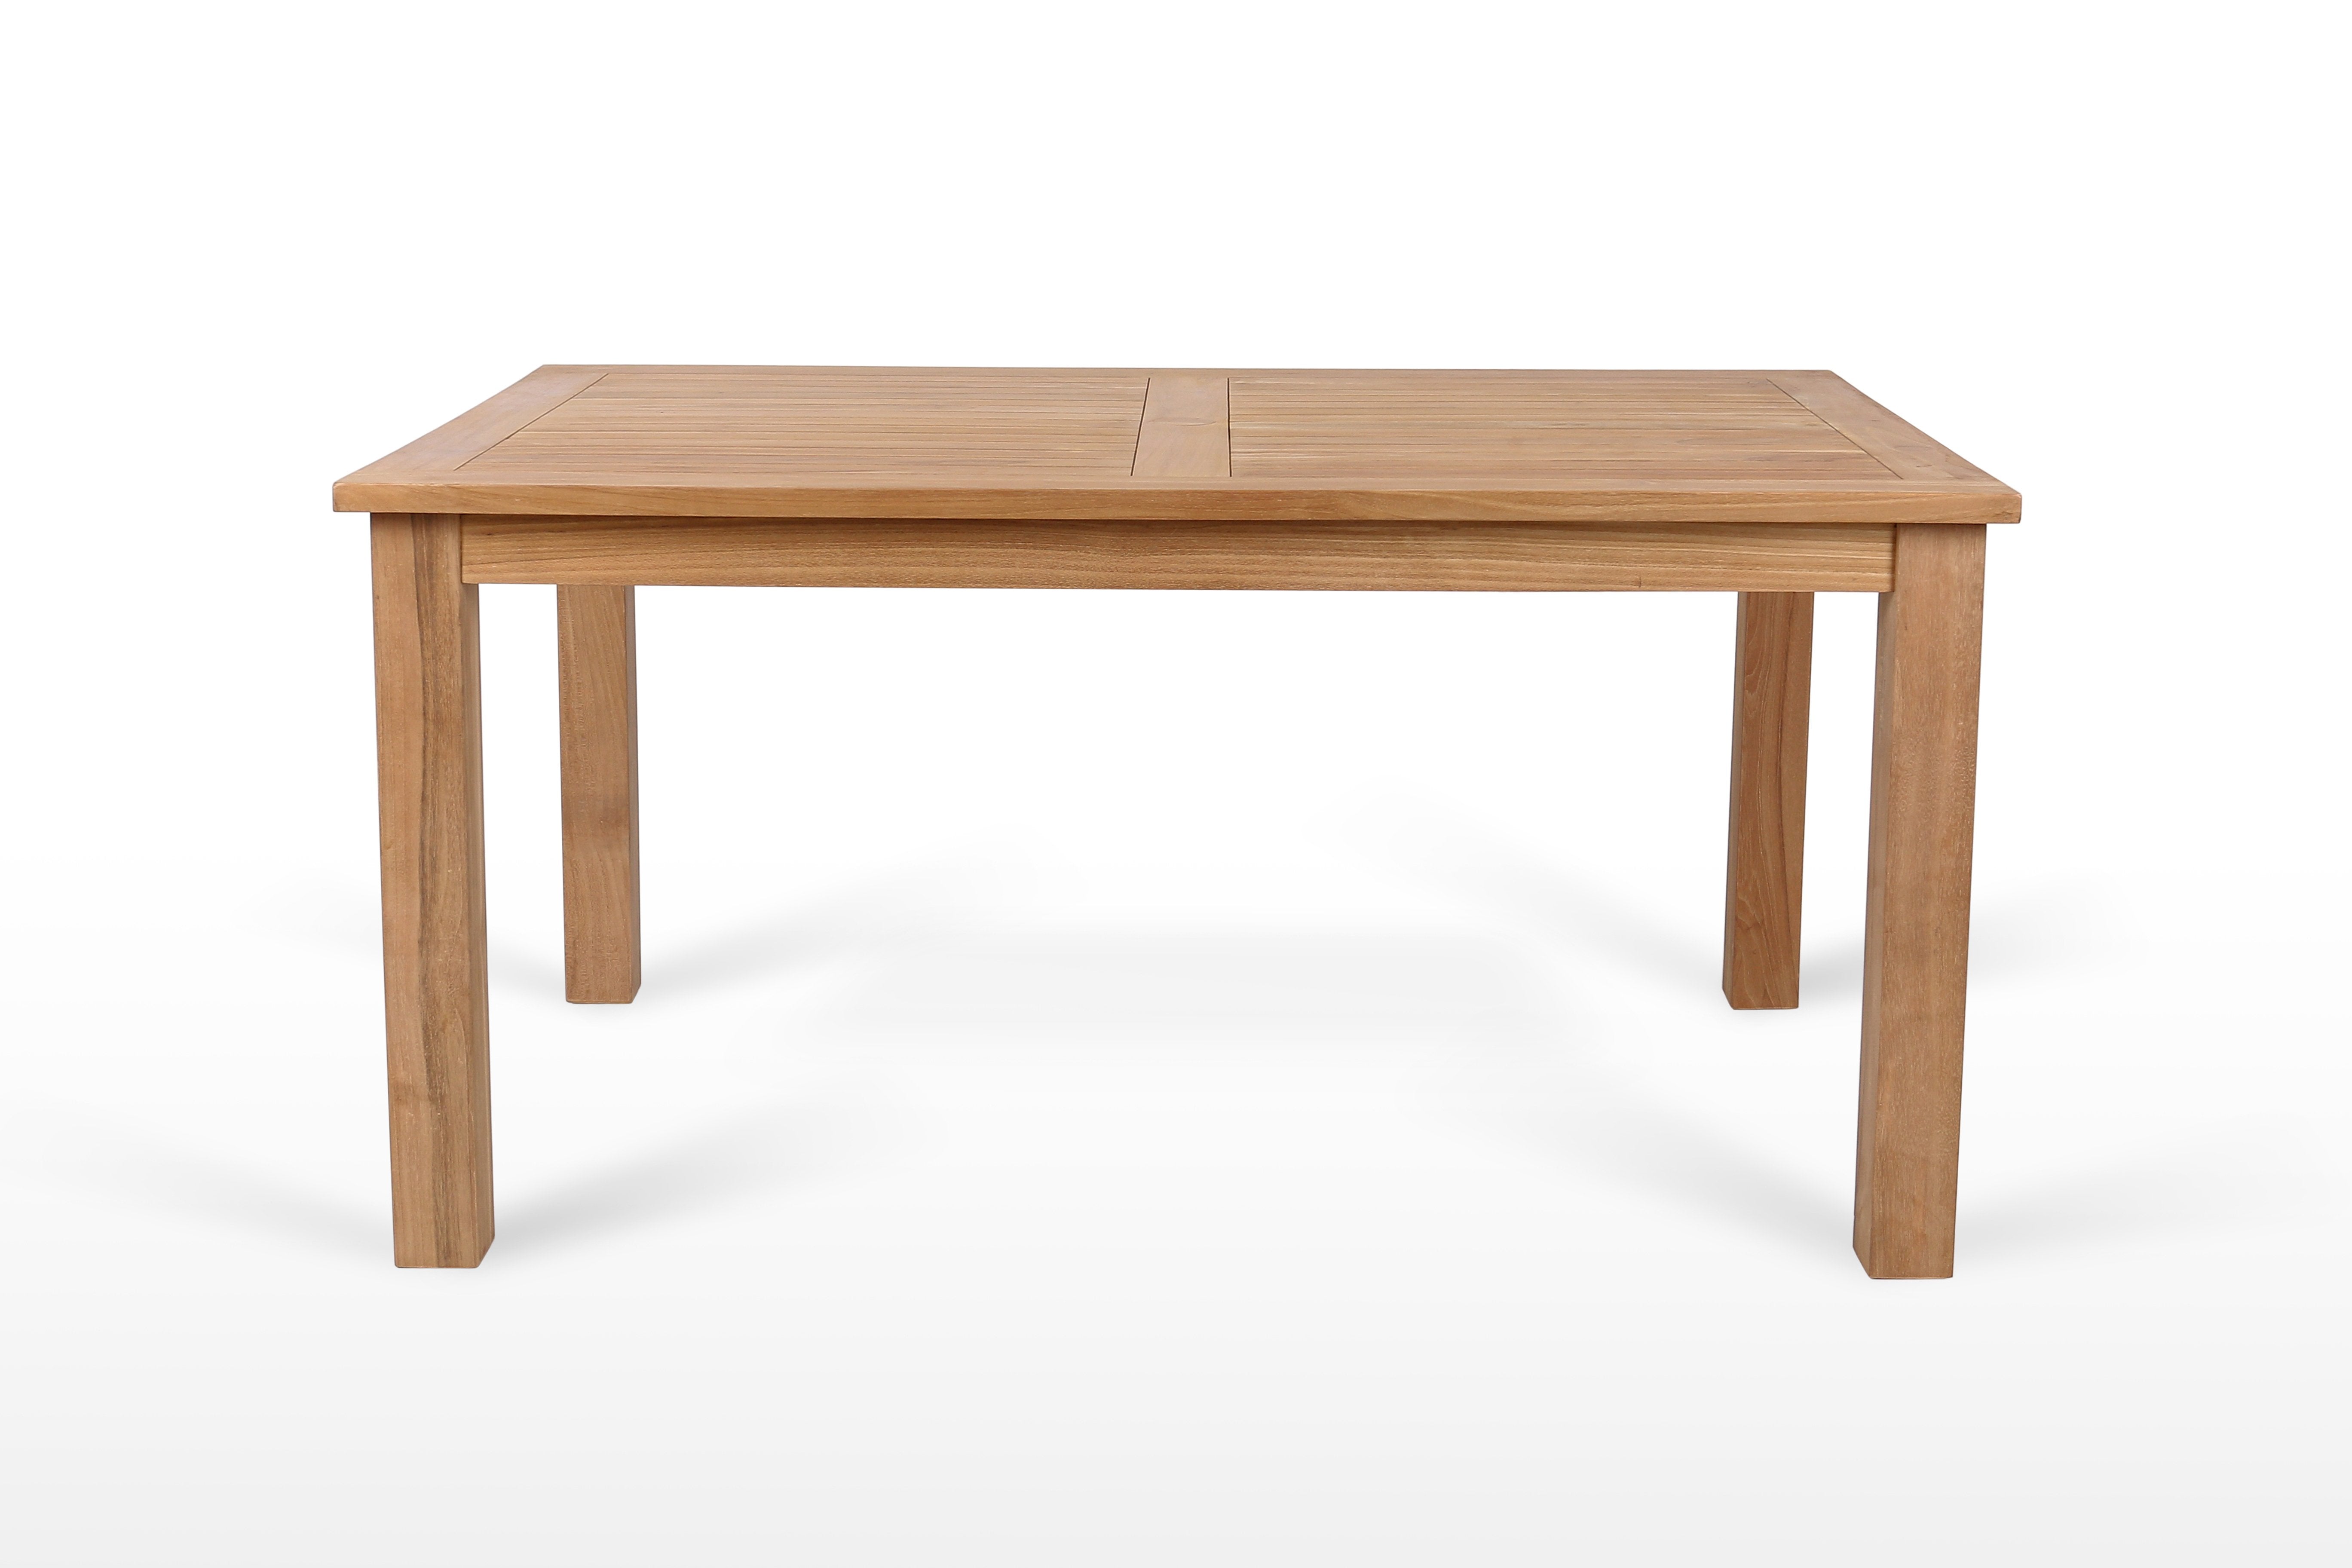 East India Montego 1500 x 1000mm Table - Tucker Barbecues